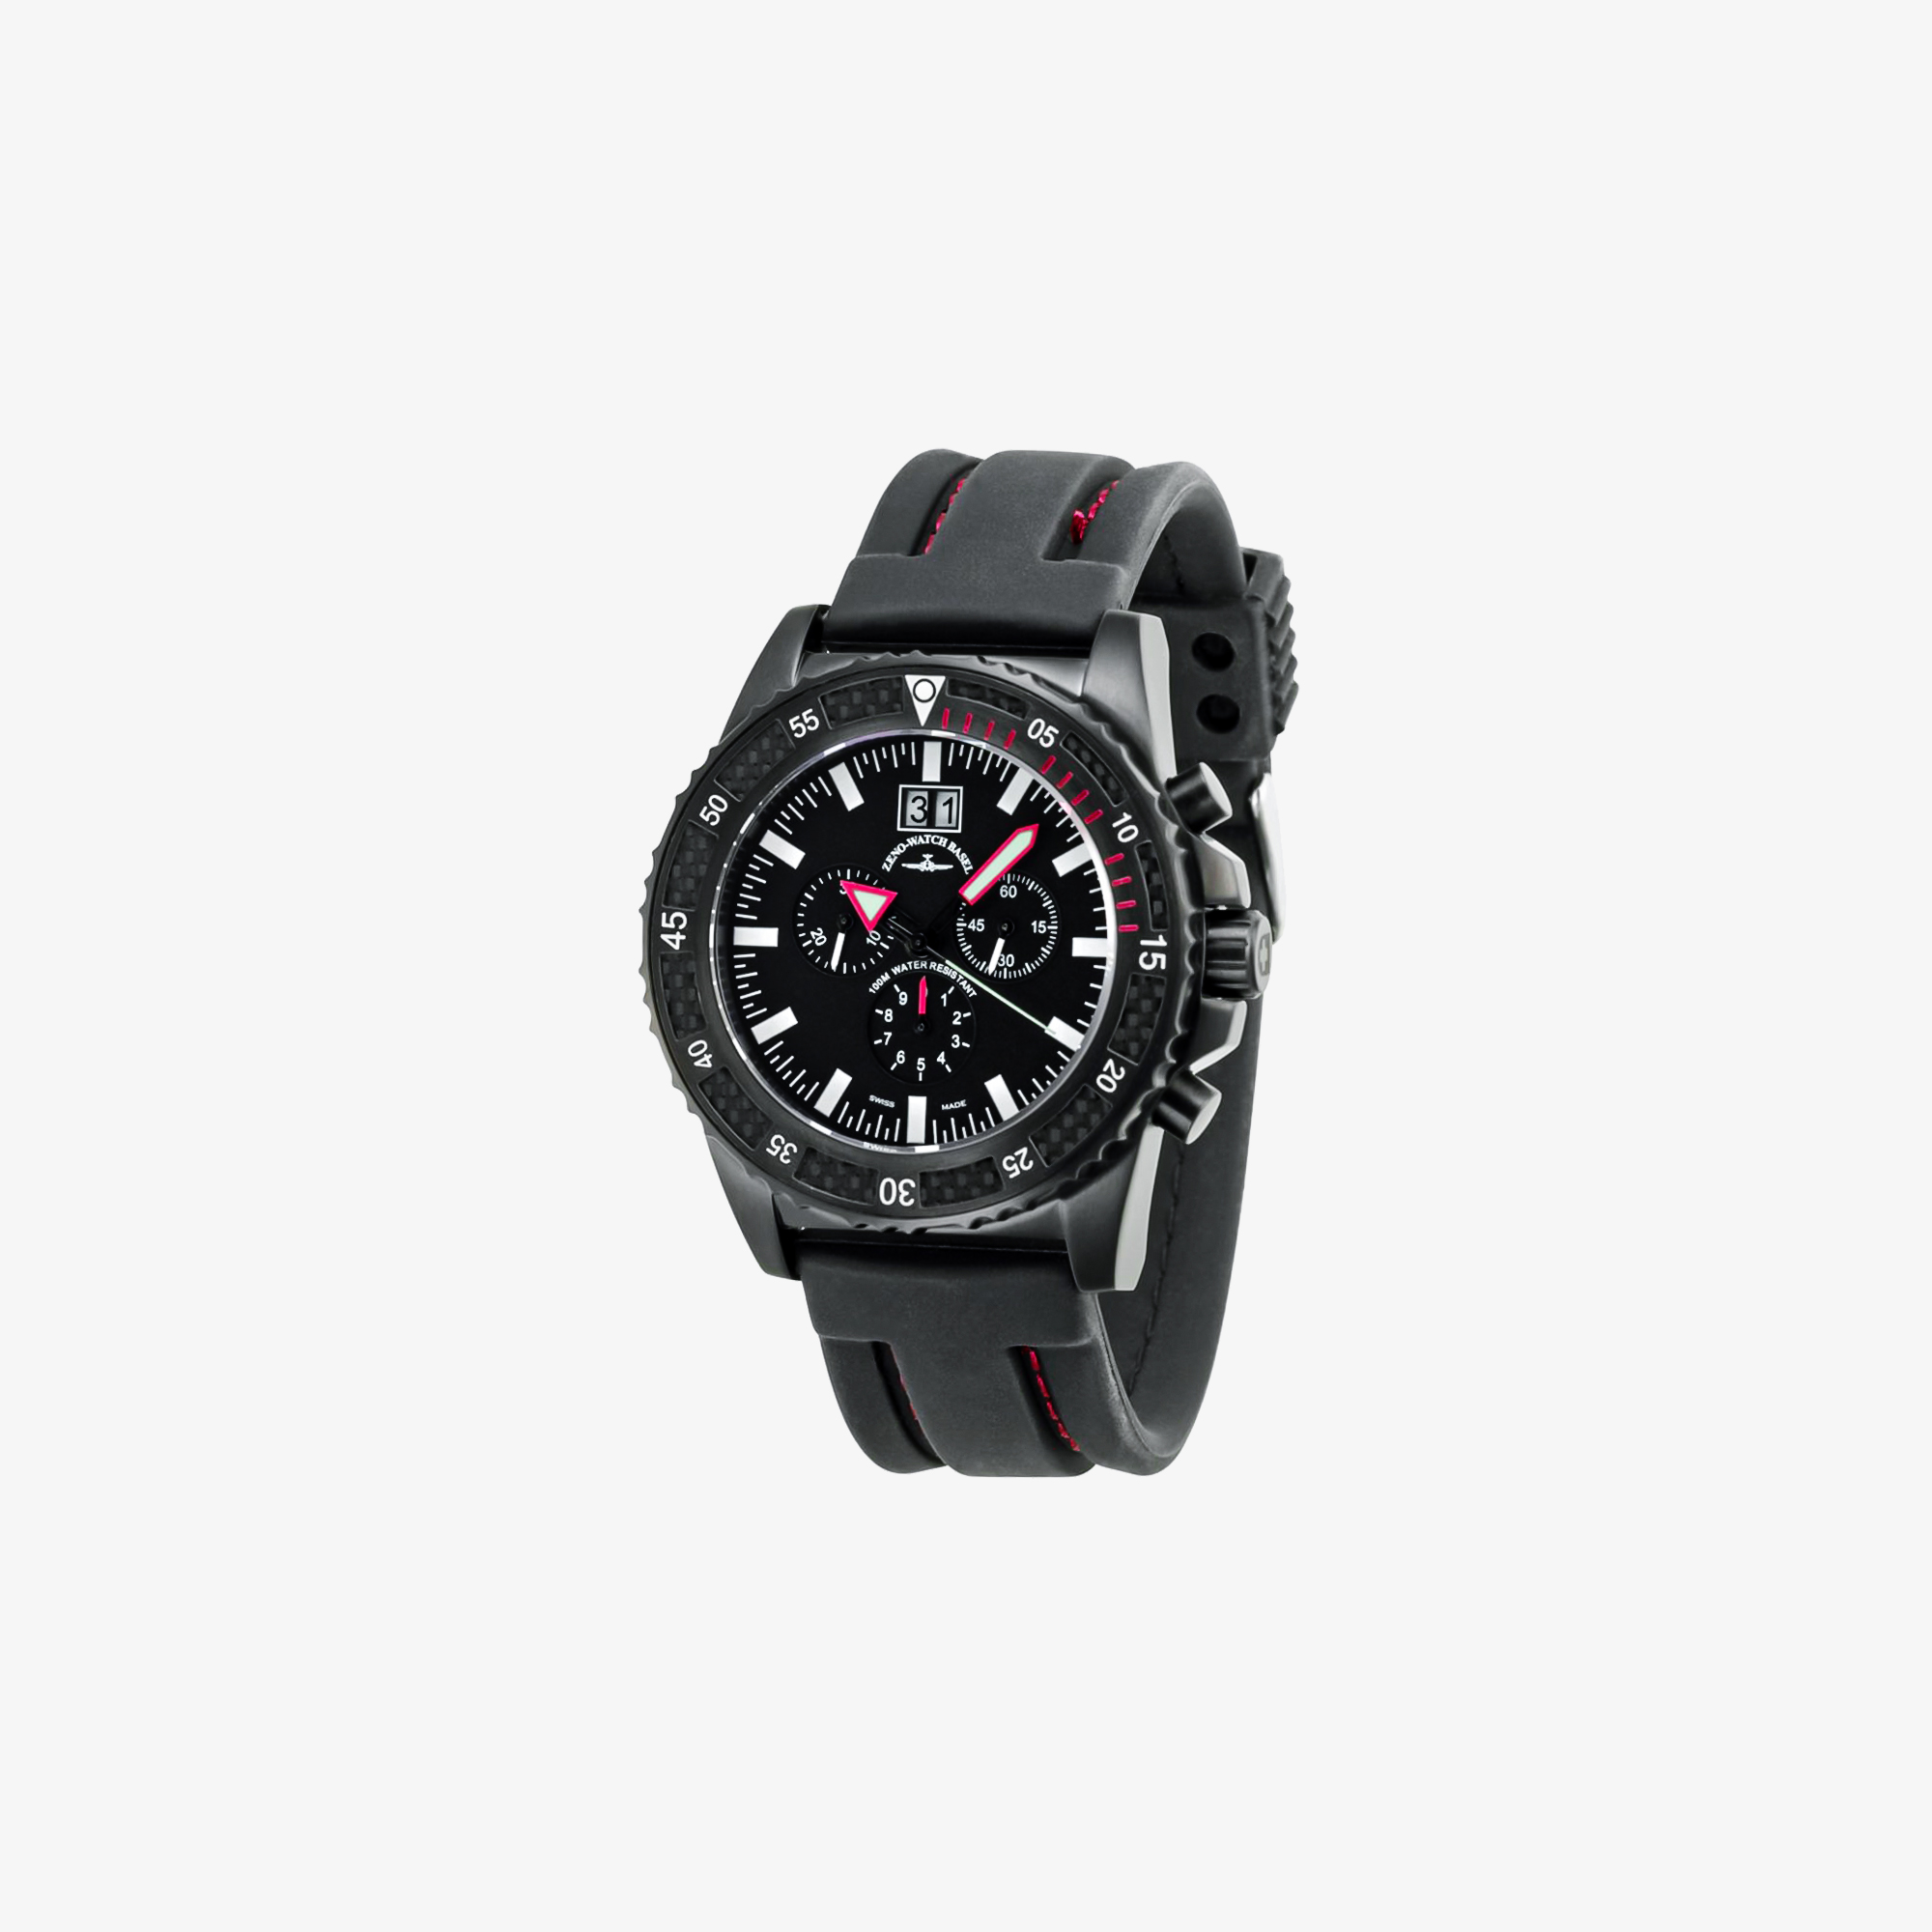 ZENO-WATCH BASEL,PD-Look Chronograph Q Big Date black+red